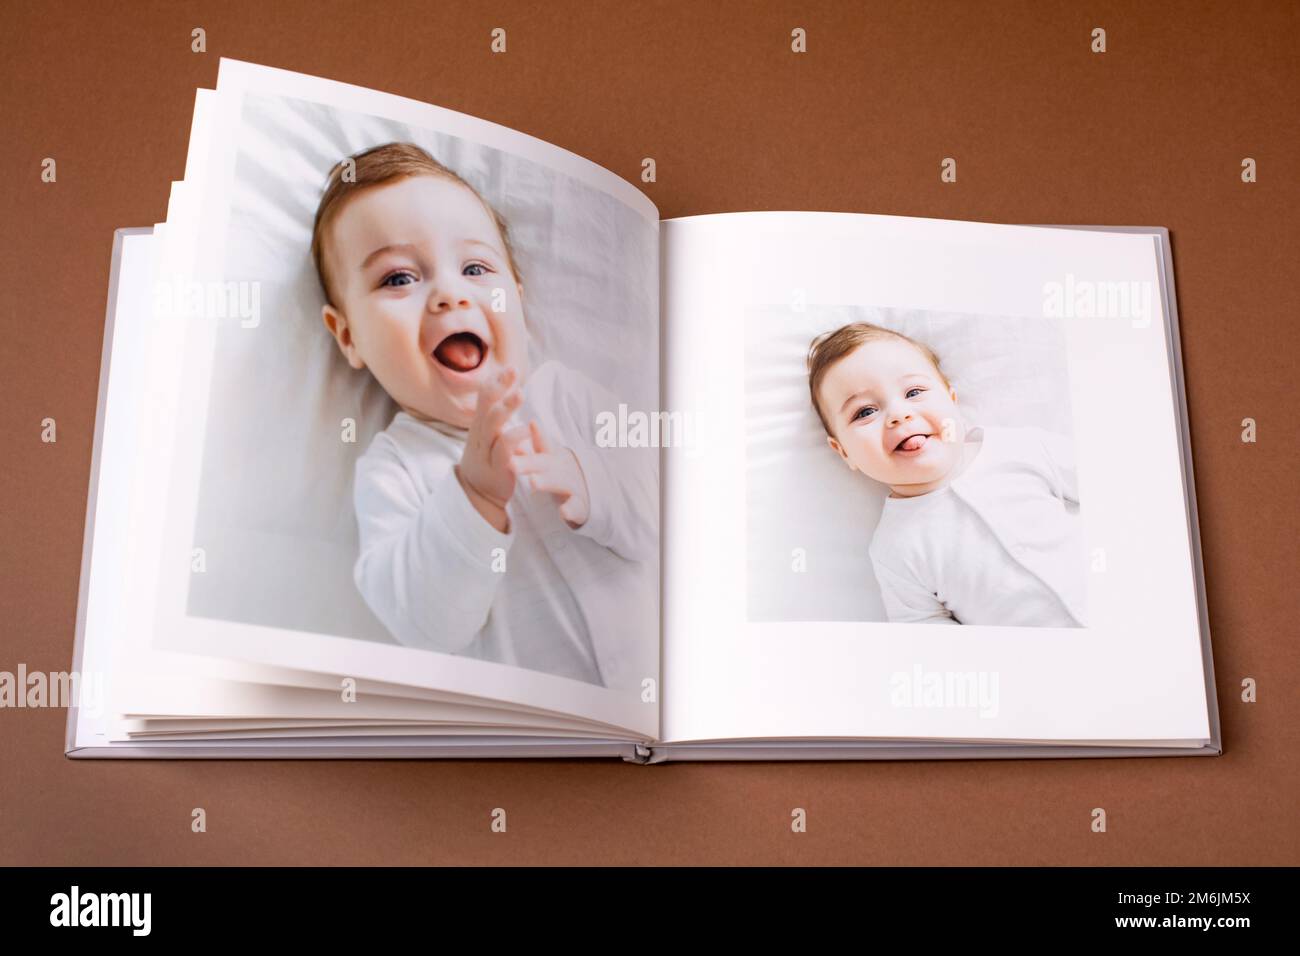 Baby's photo book on brown background . Children's emotional portrait.Cute toddler boy Stock Photo